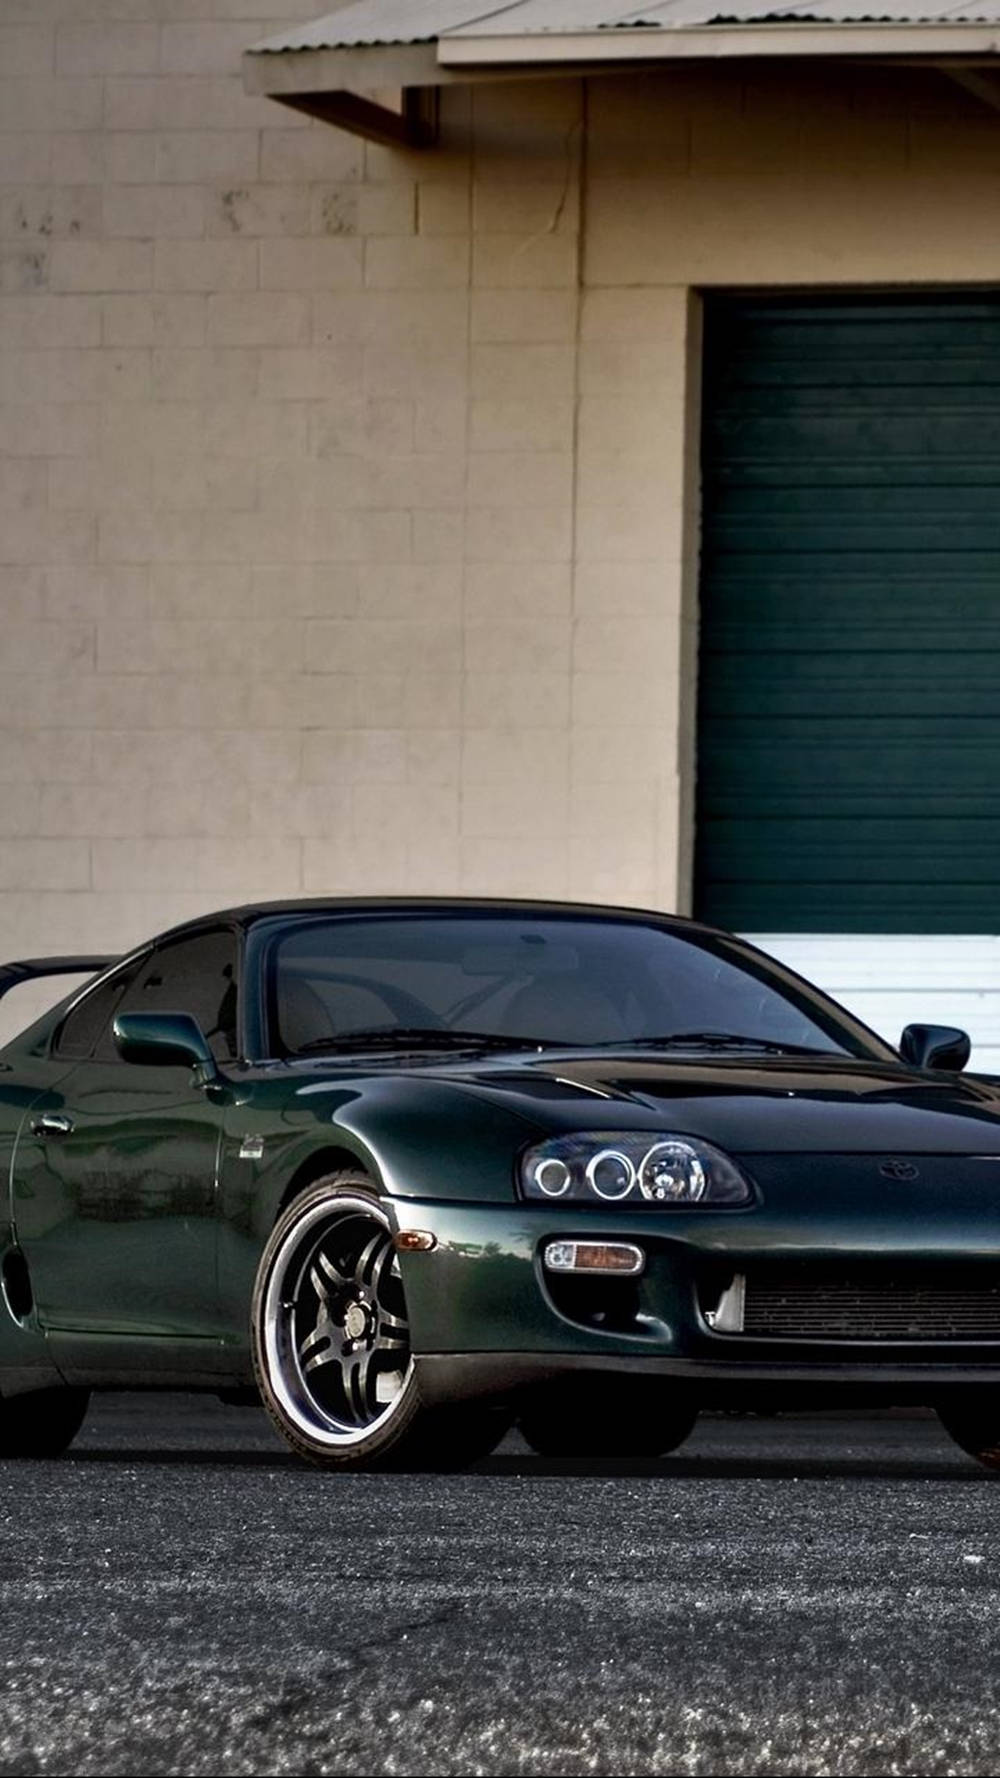 [100+] Toyota Supra Mk4 Pictures | Wallpapers.com